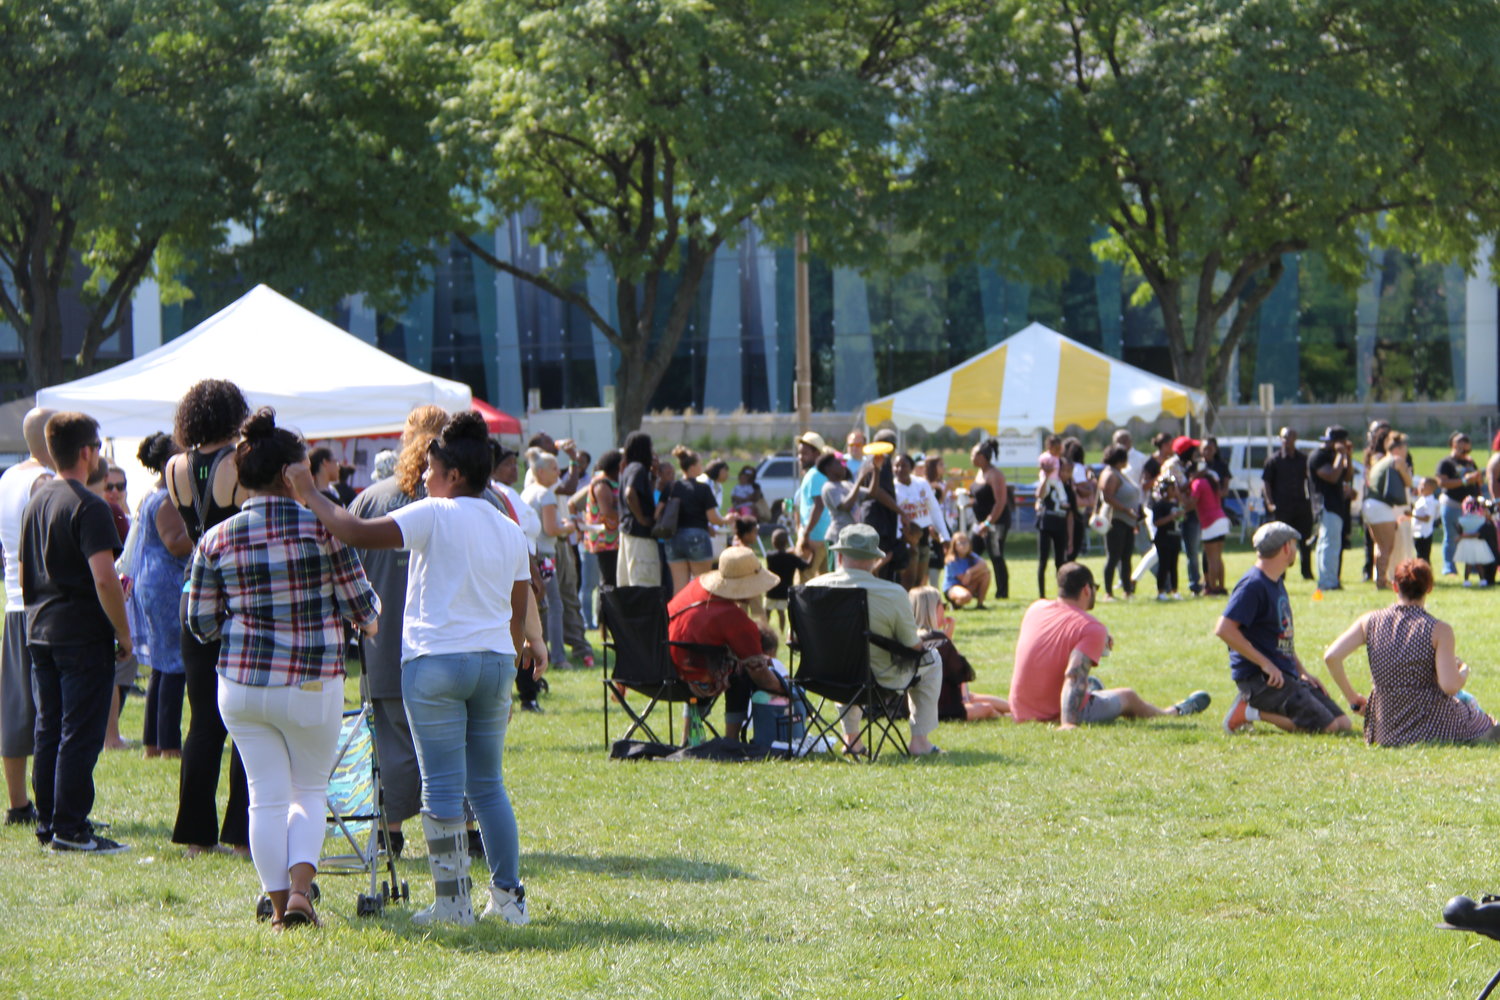 Michigan Chicken Wing Festival takes place Labor Day weekend in Adado Riverfront Park.